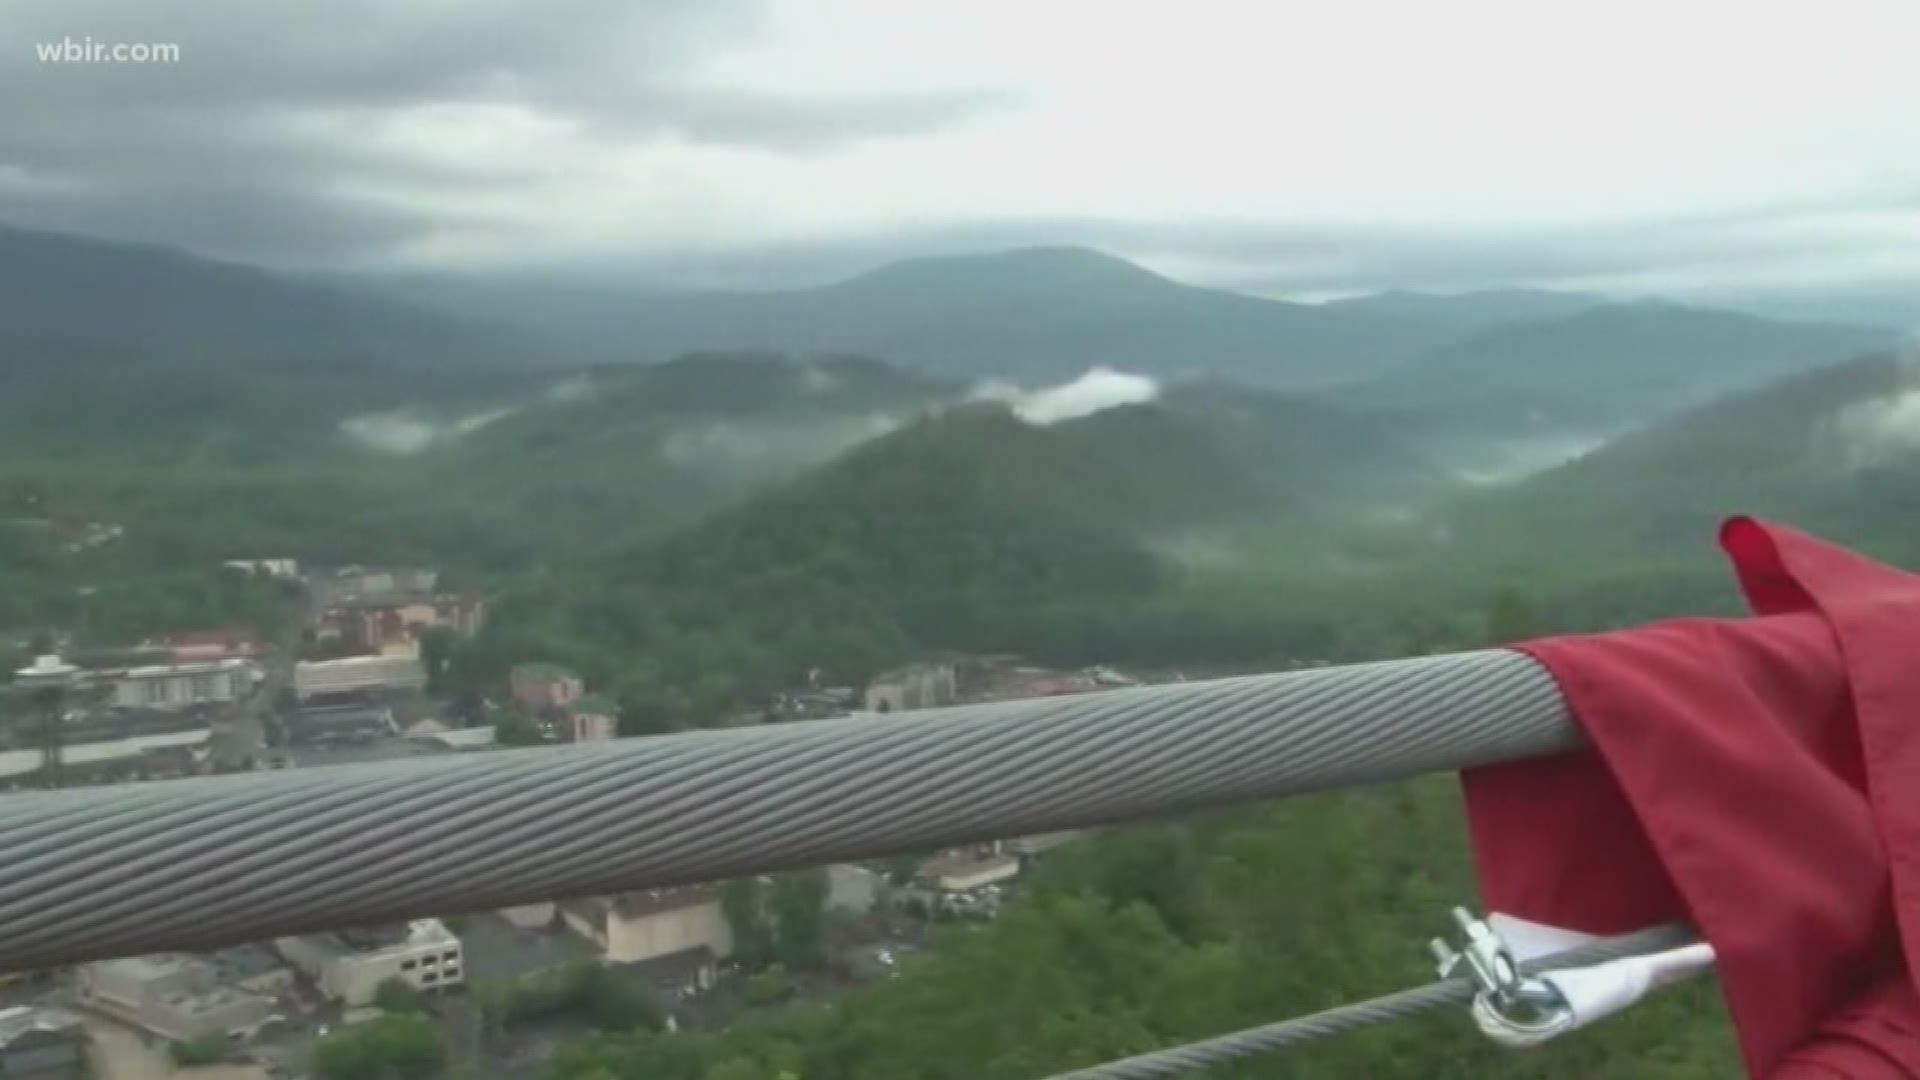 The record-breaking SkyBridge attraction is now open in Gatlinburg. Those who dare to walk it will be able to say they've taken a trip across America's longest pedestrian suspension bridge and the third longest in the world.